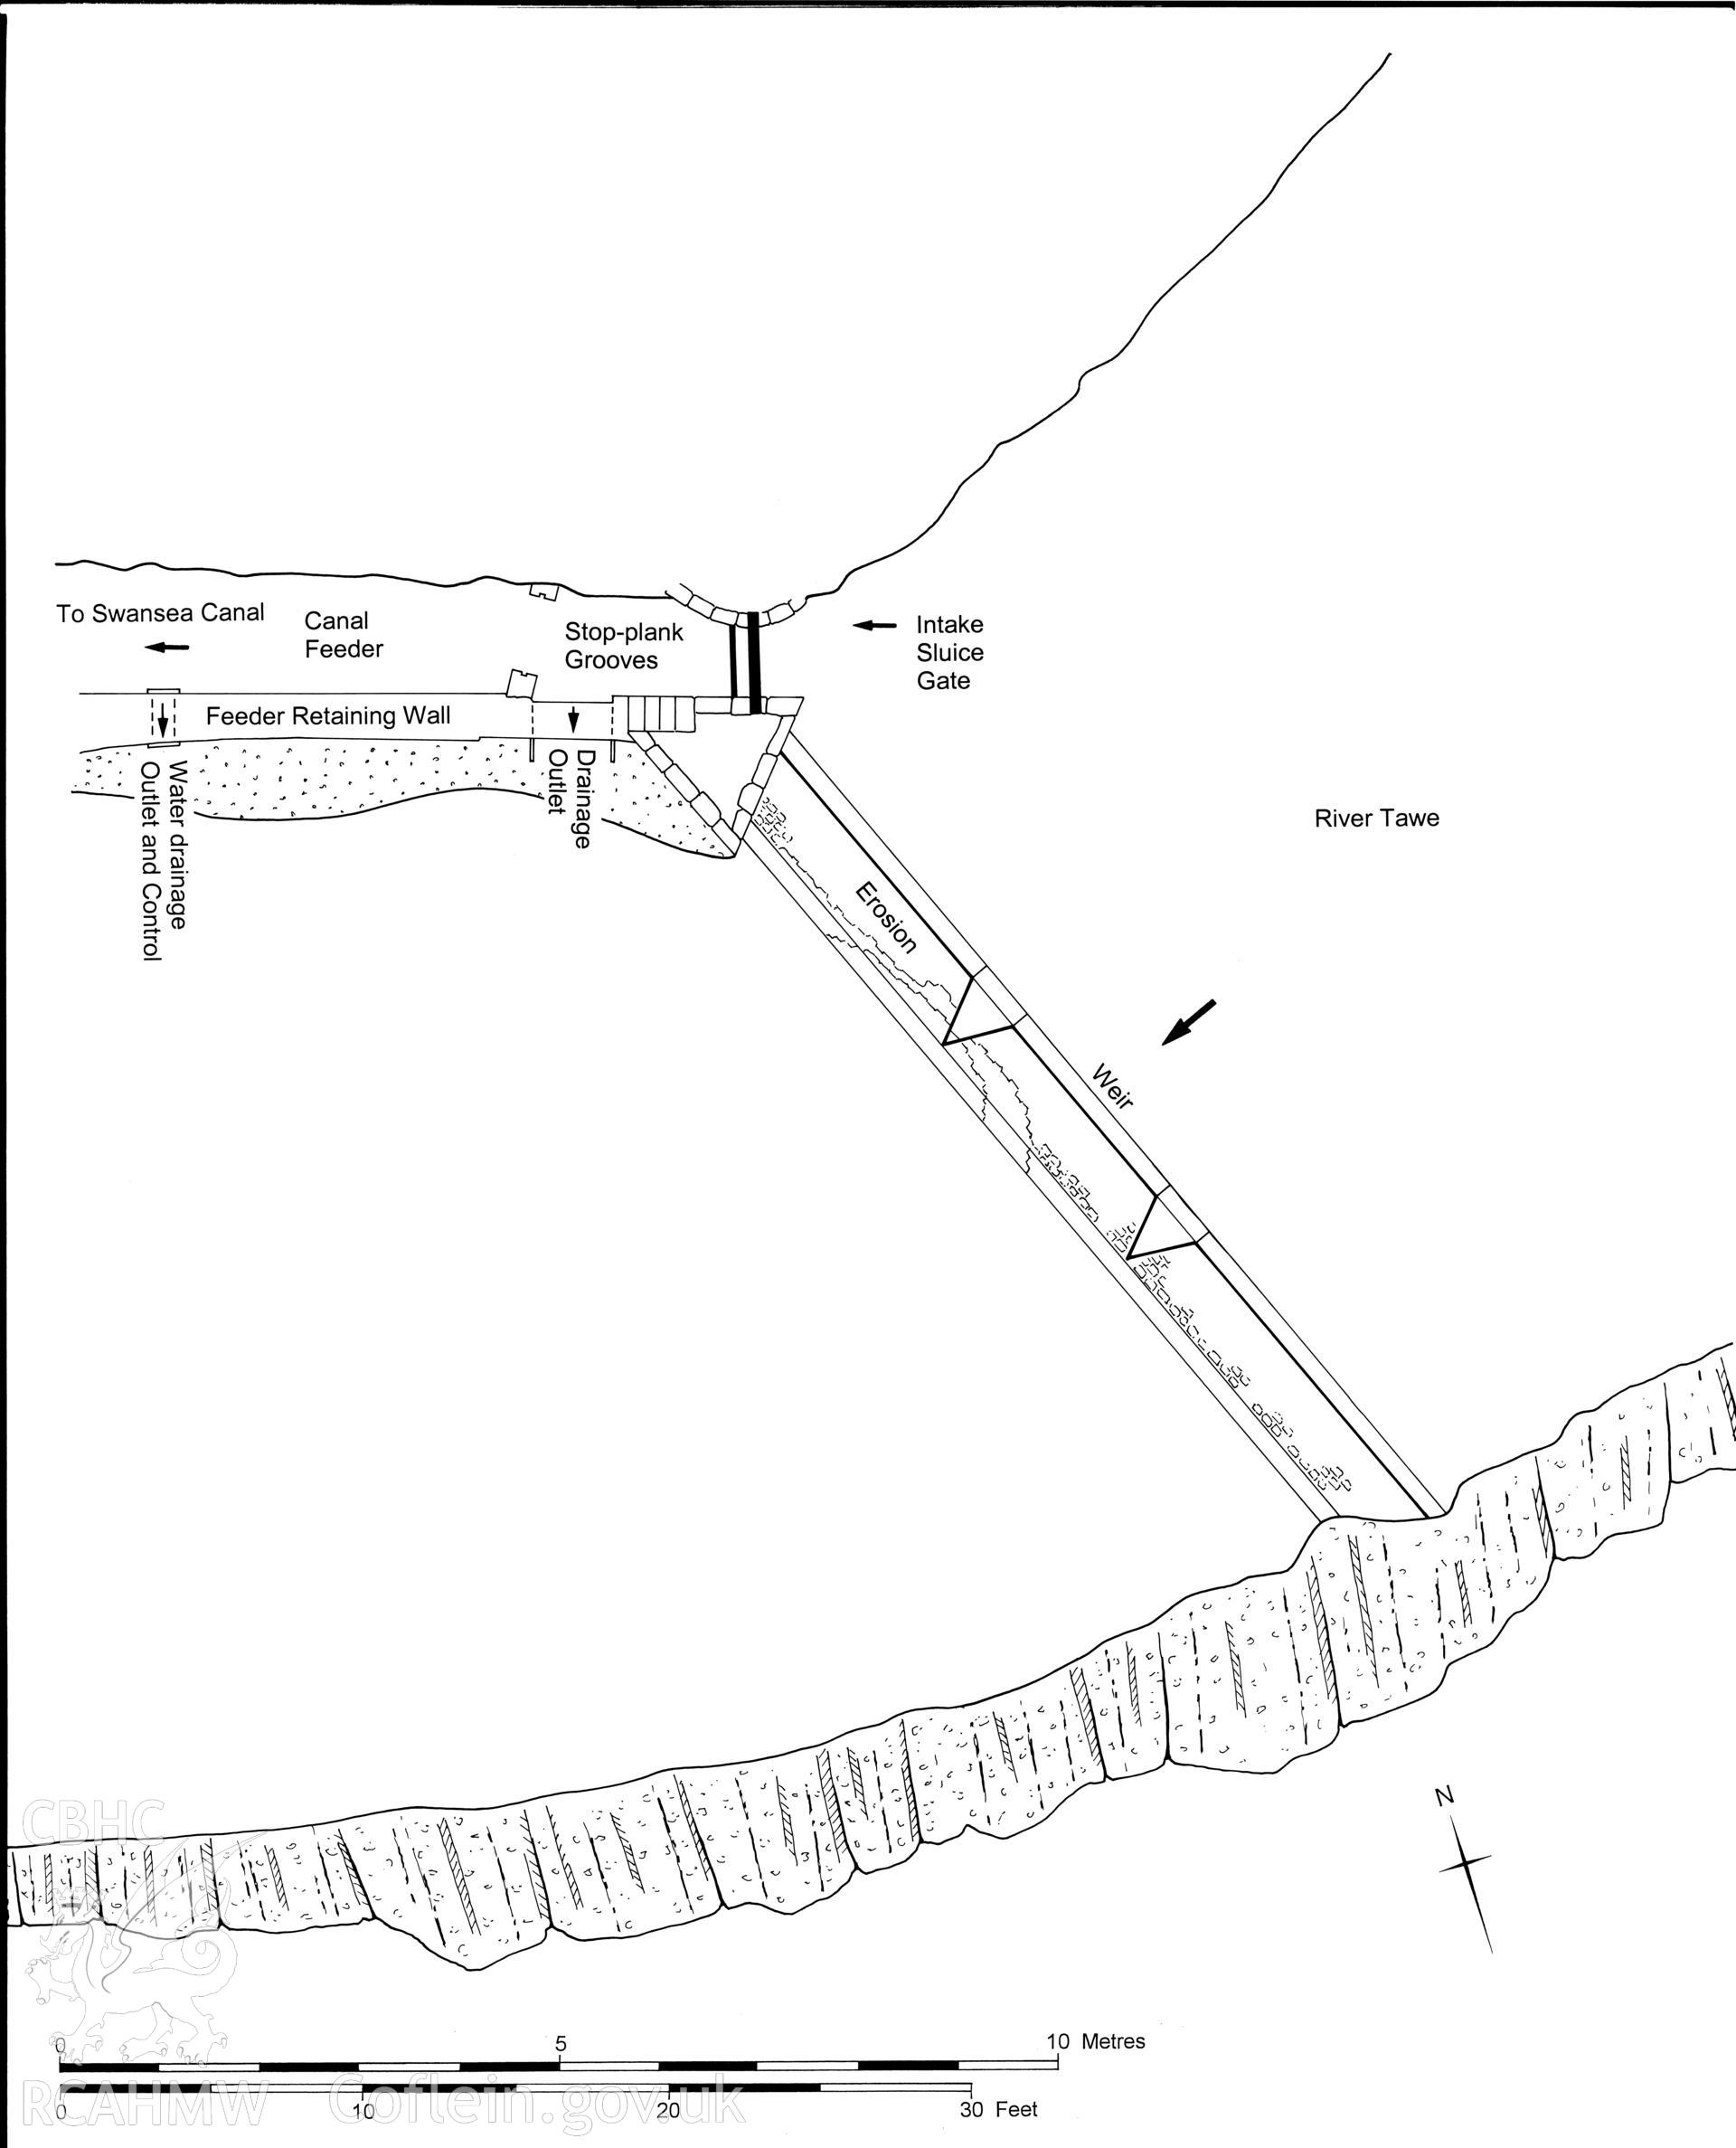 Measured drawing showing plan and elevation of the Abercraf Canal Feeder Weir, produced by C.W. Green, 2007.